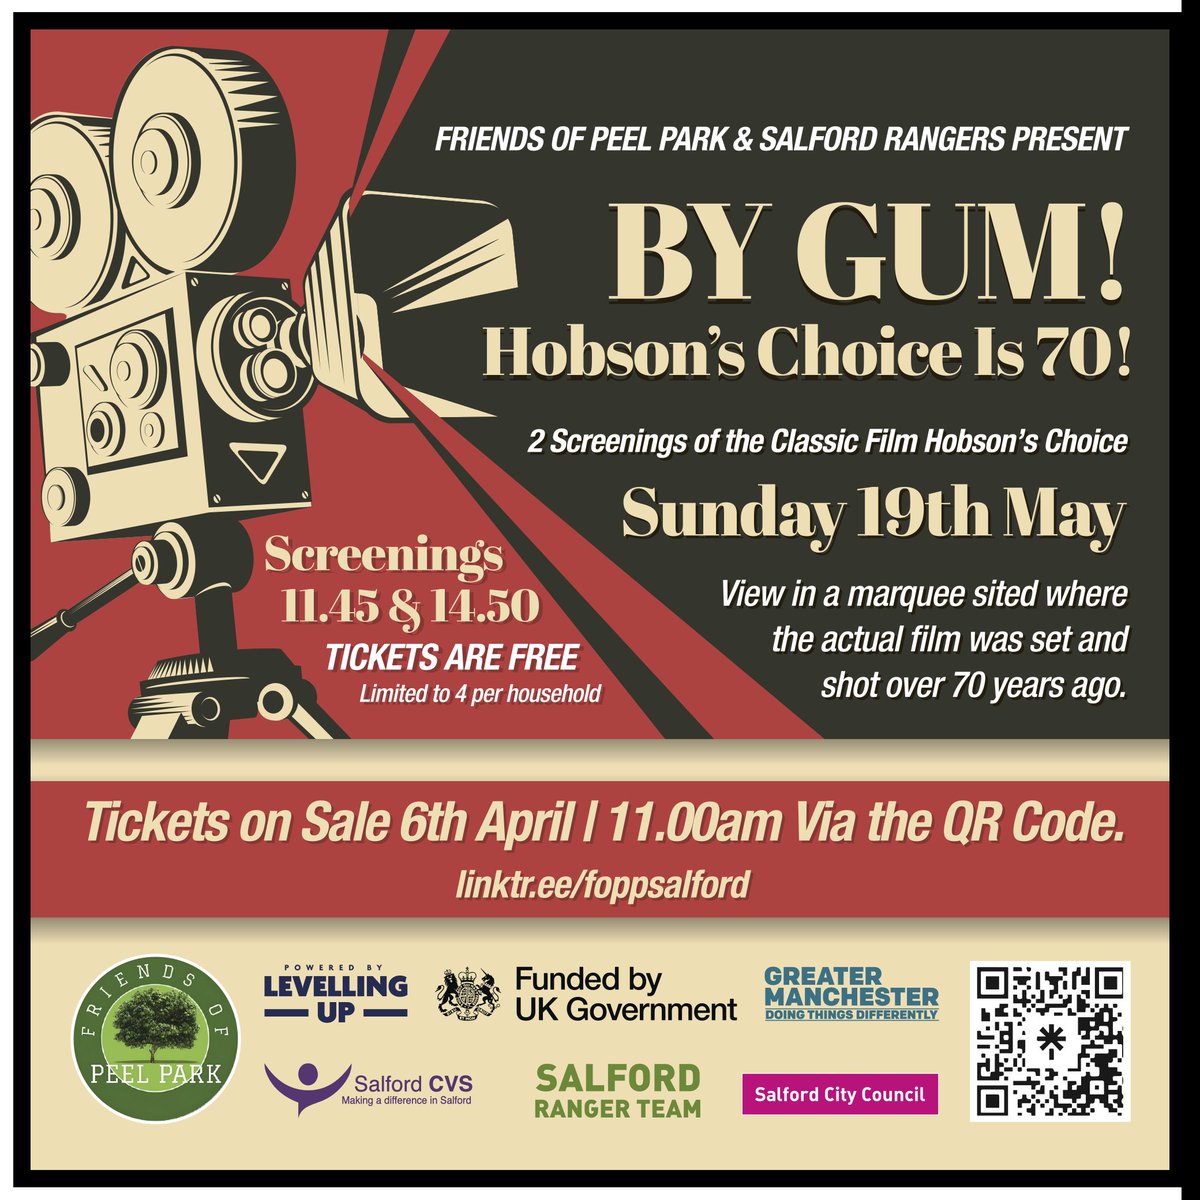 It's 50 days until our 'By Gum !Hobsons Choice is 70' celebration. Free tickets for the 2 screenings in a large marque will be available to book from next Saturday 6th April at 11am via the link linktr.ee/foppsalford #Hobsonschoiceis70